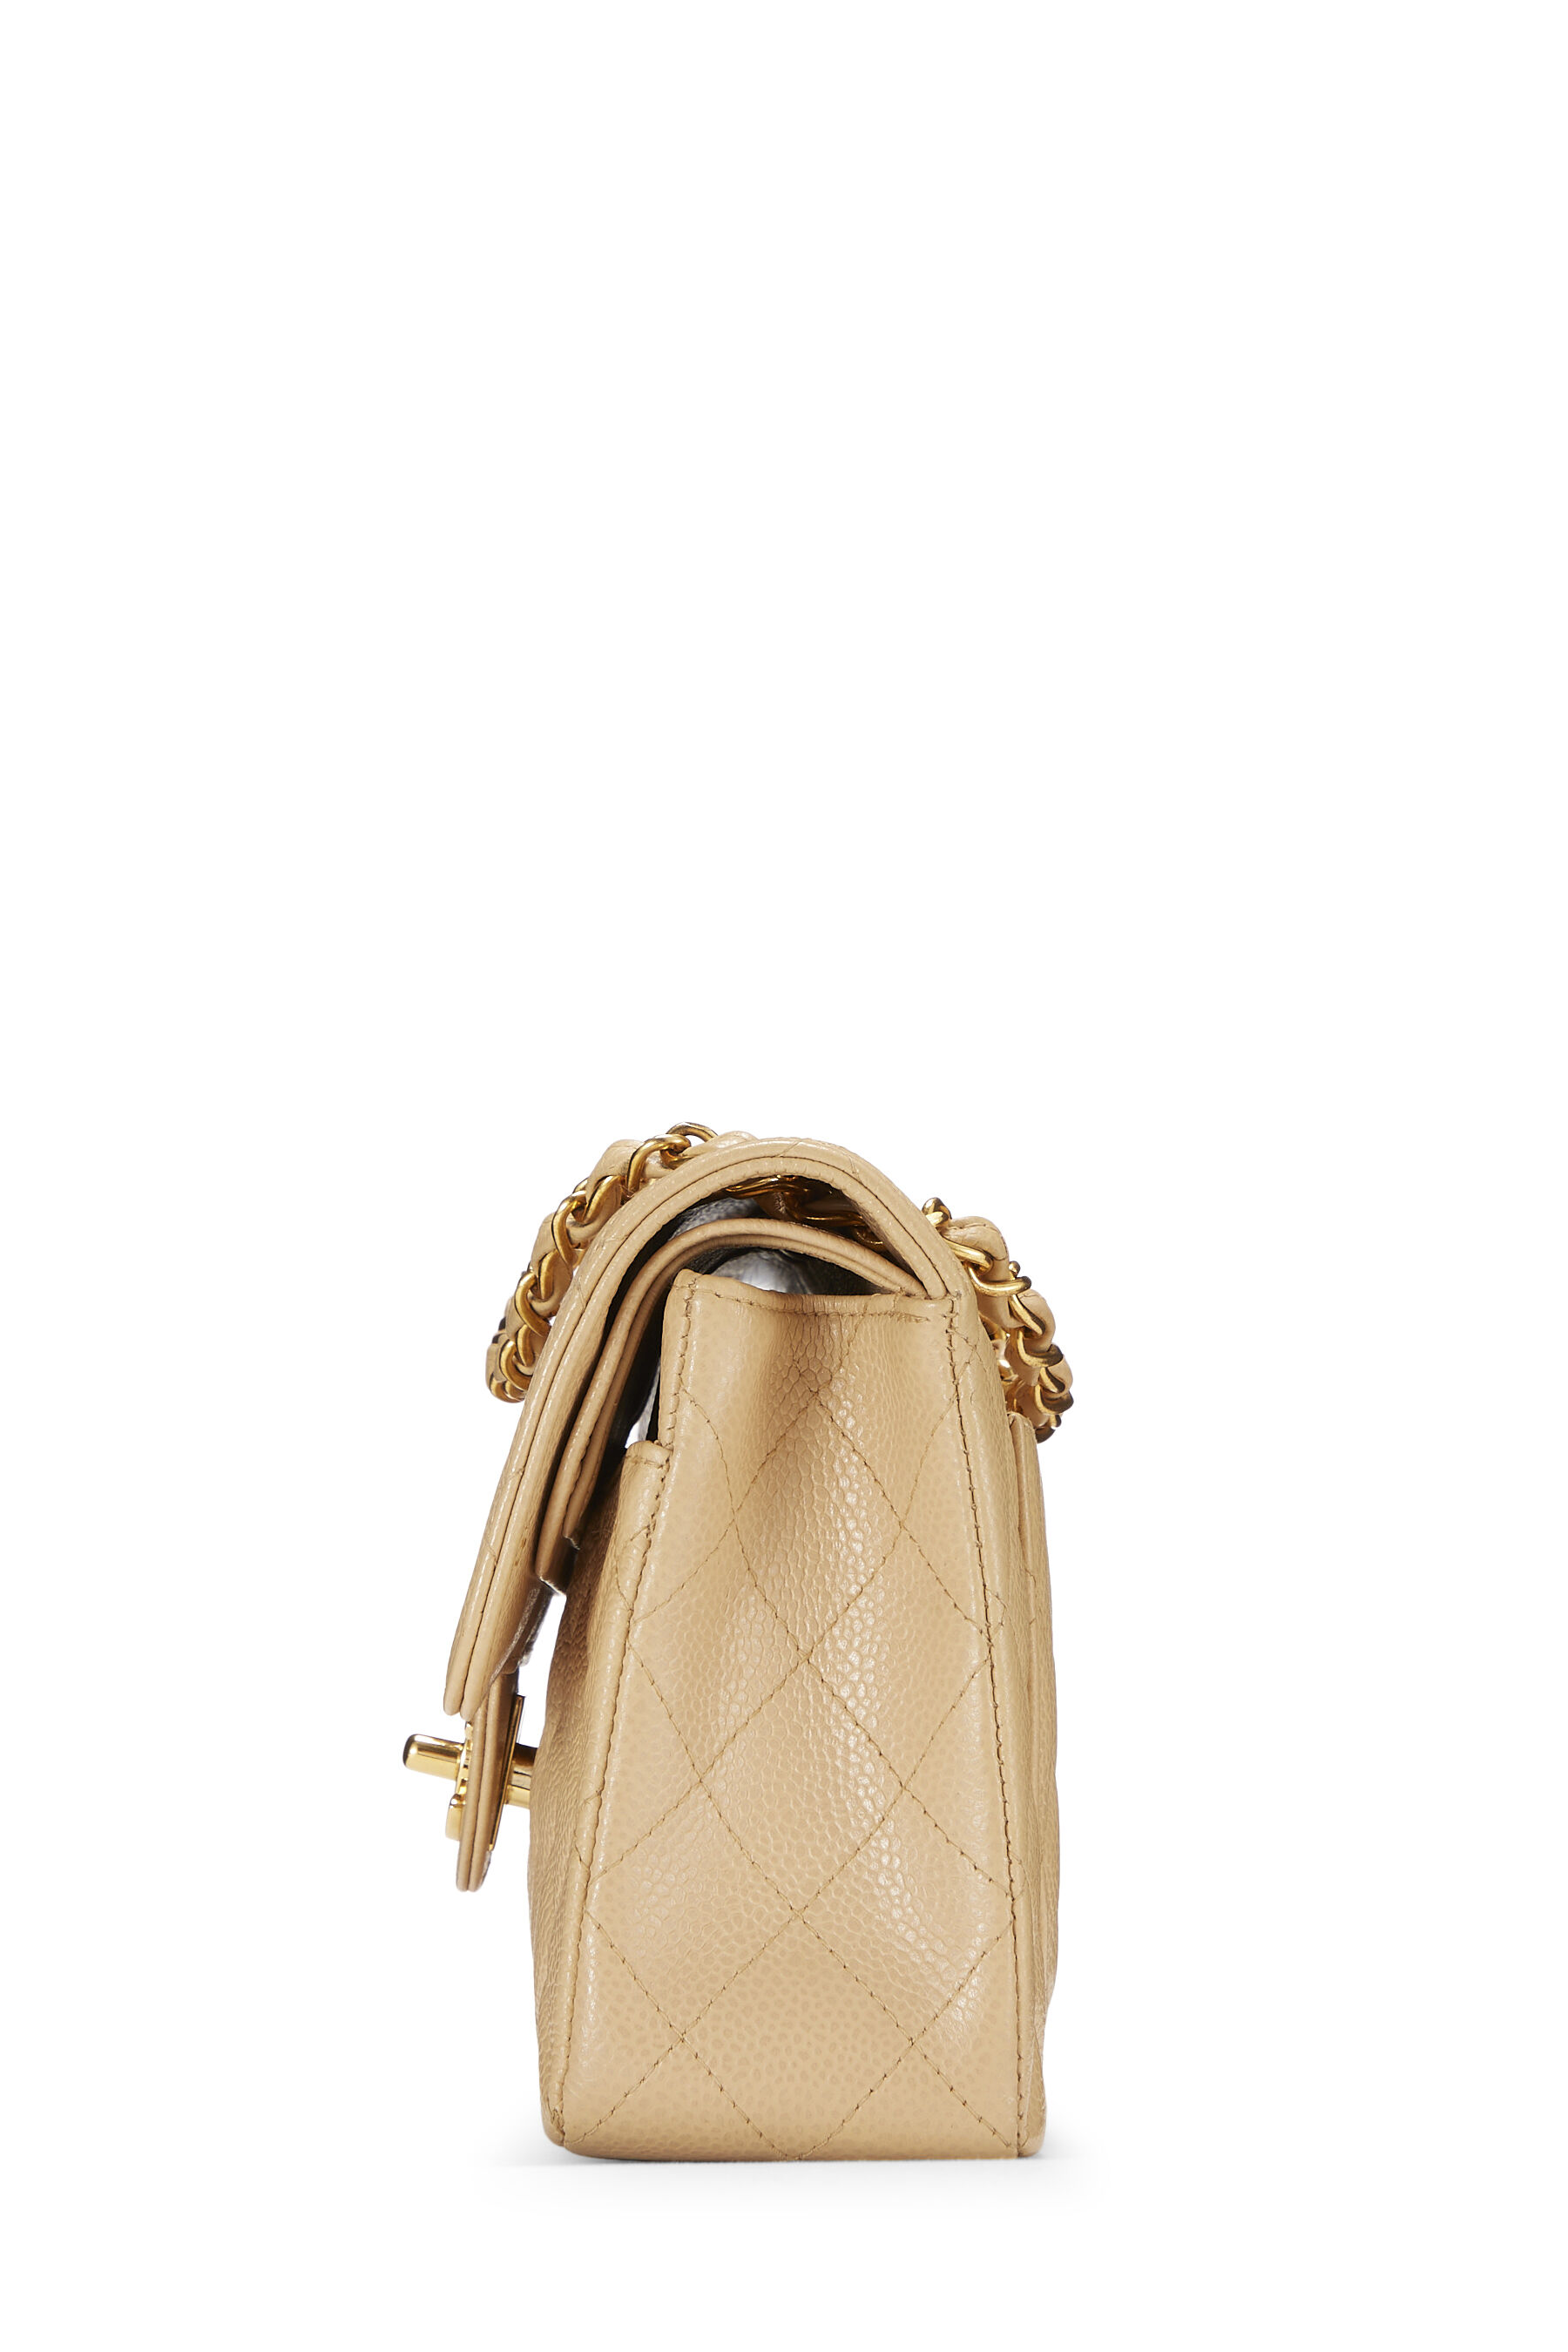 Chanel Beige Quilted Caviar Classic Double Flap Small